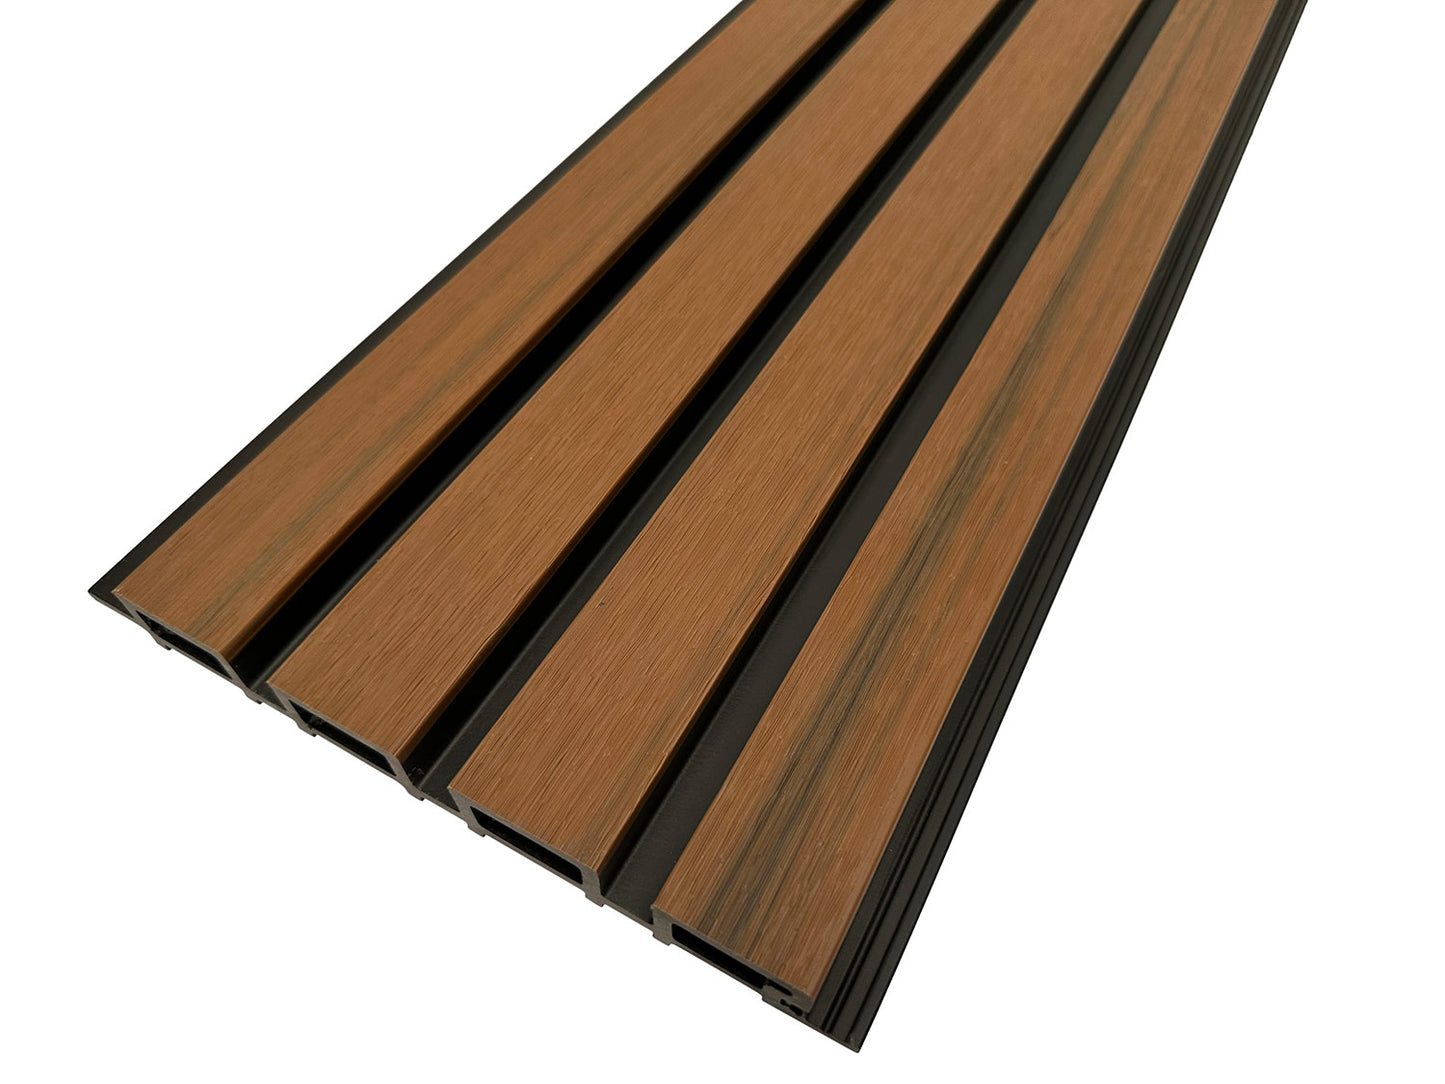 Weathered Teak With Black Accents Exterior Slat Wall Paneling for Outdoors